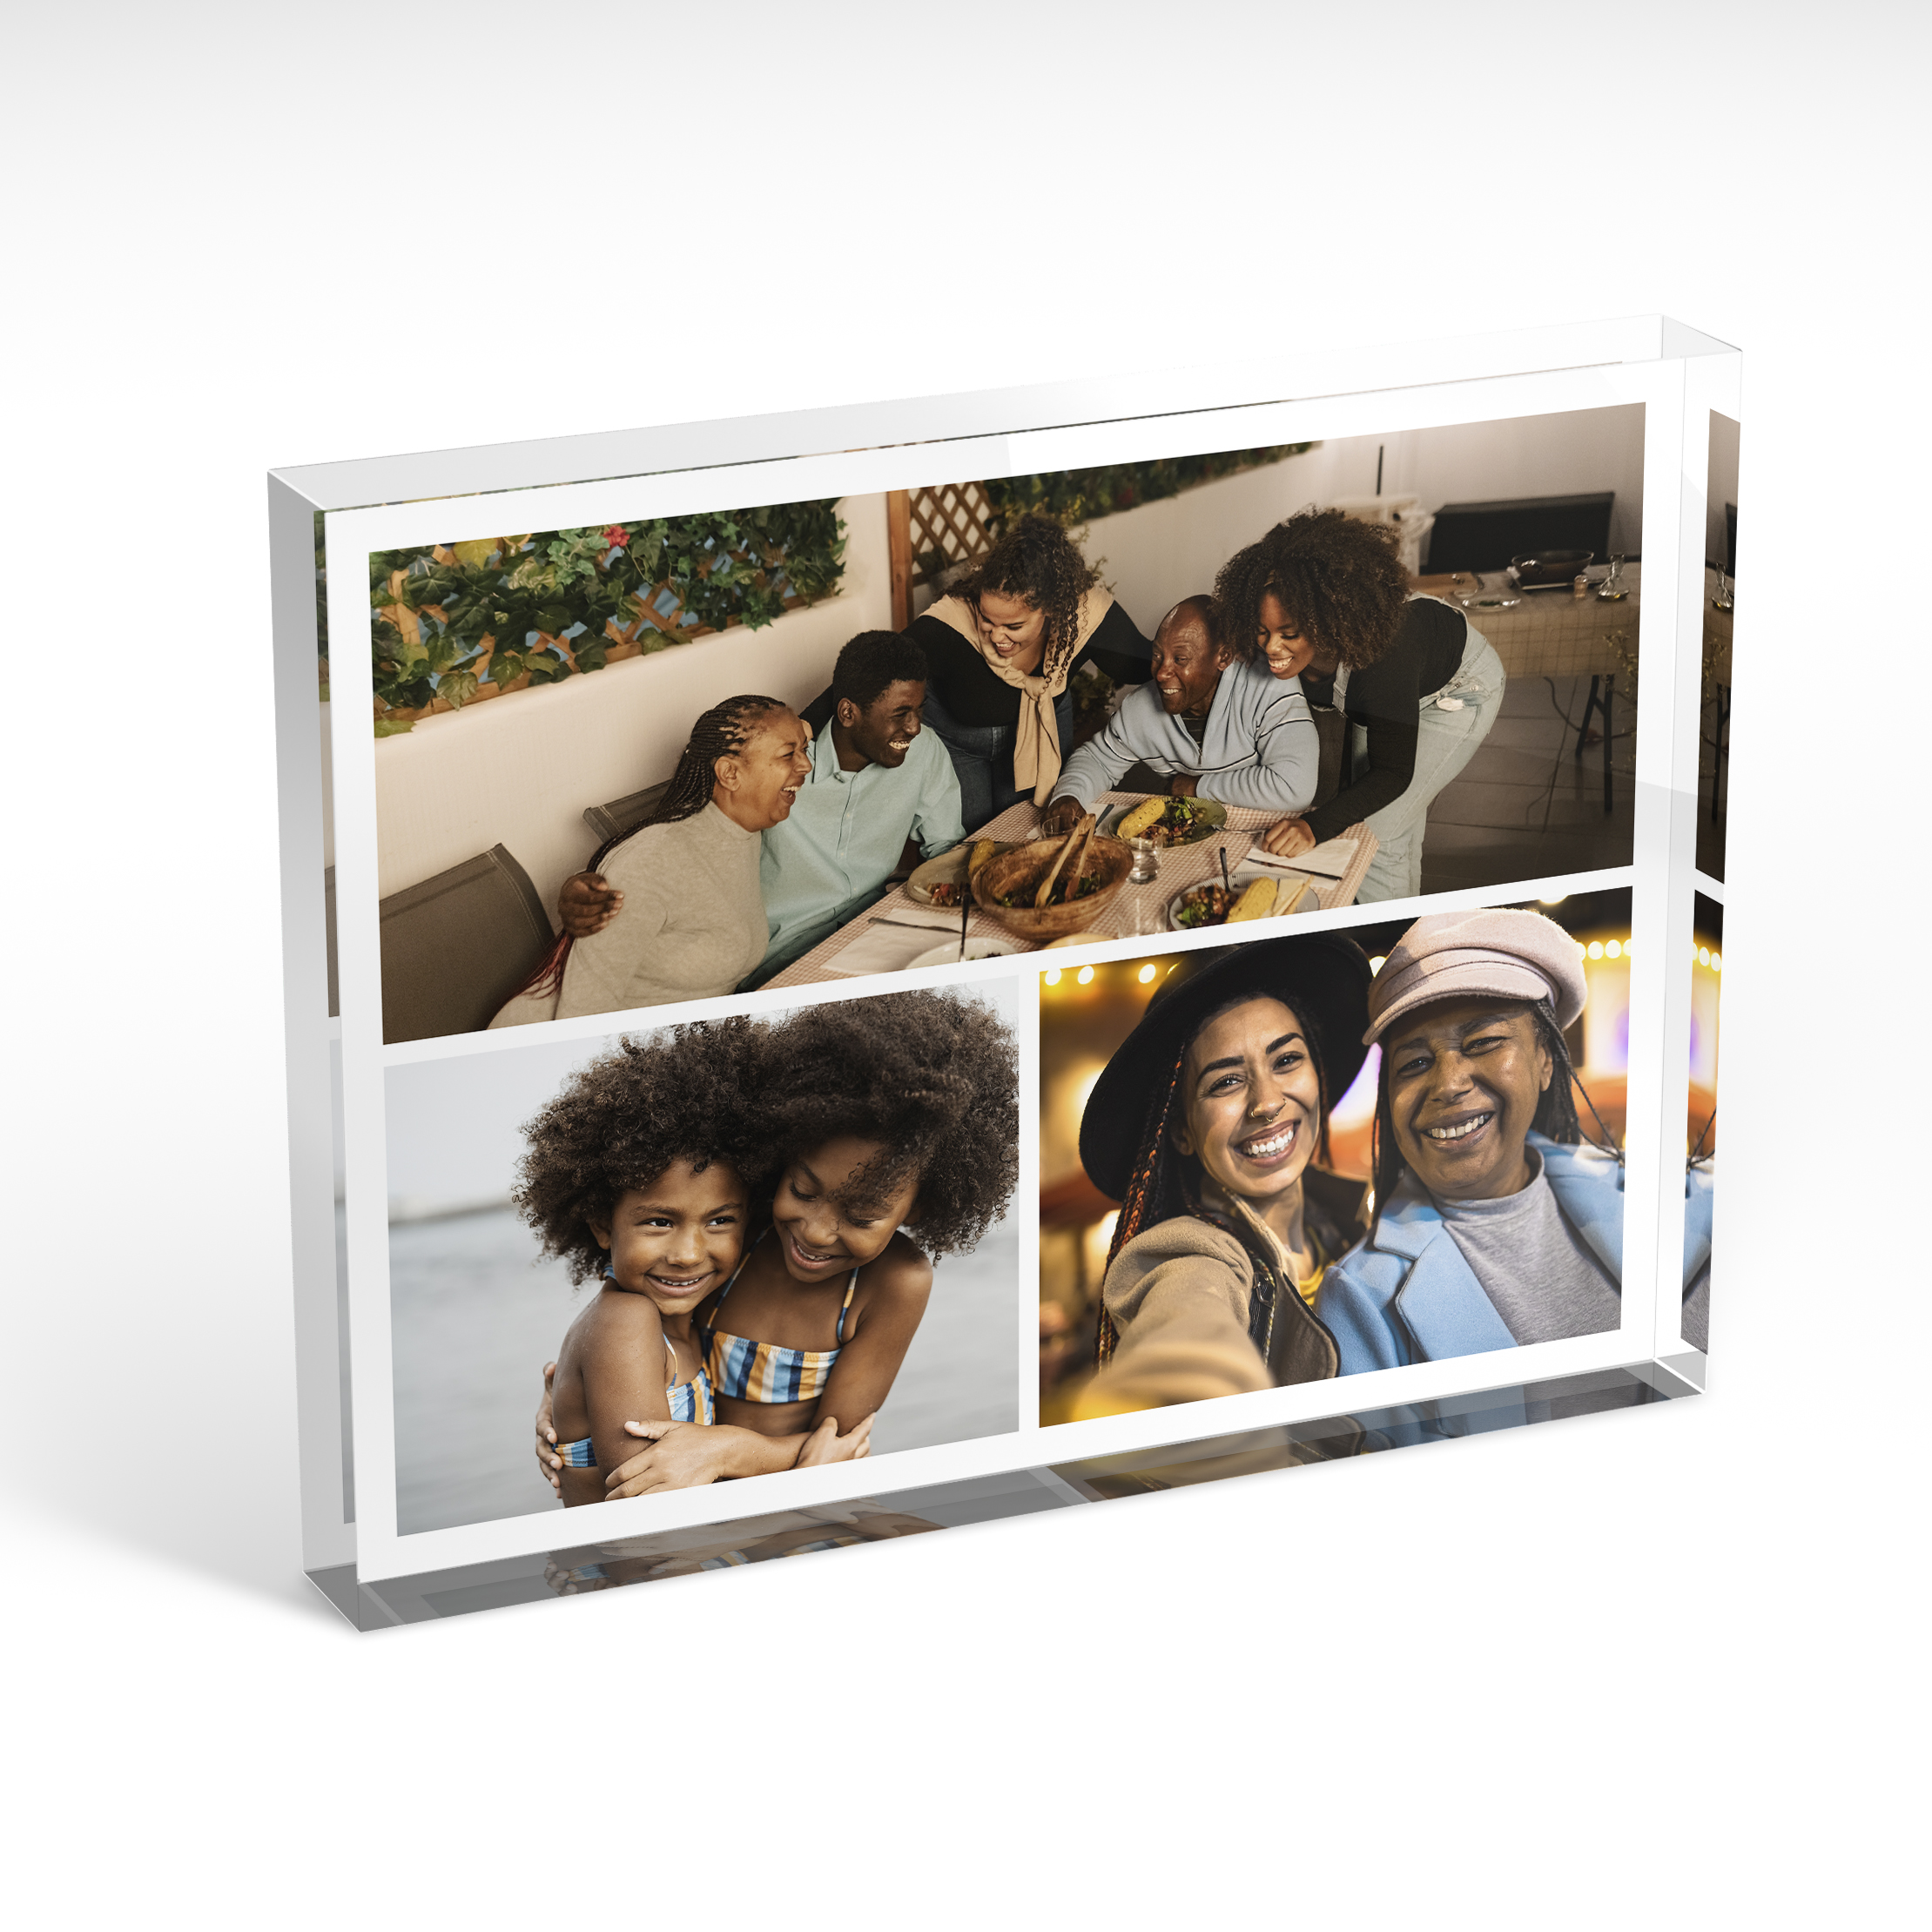 An angled side view of a landscape layout Acrylic Photo Block with space for 3 photos. Thiis design is named "Trilogy Collage". 